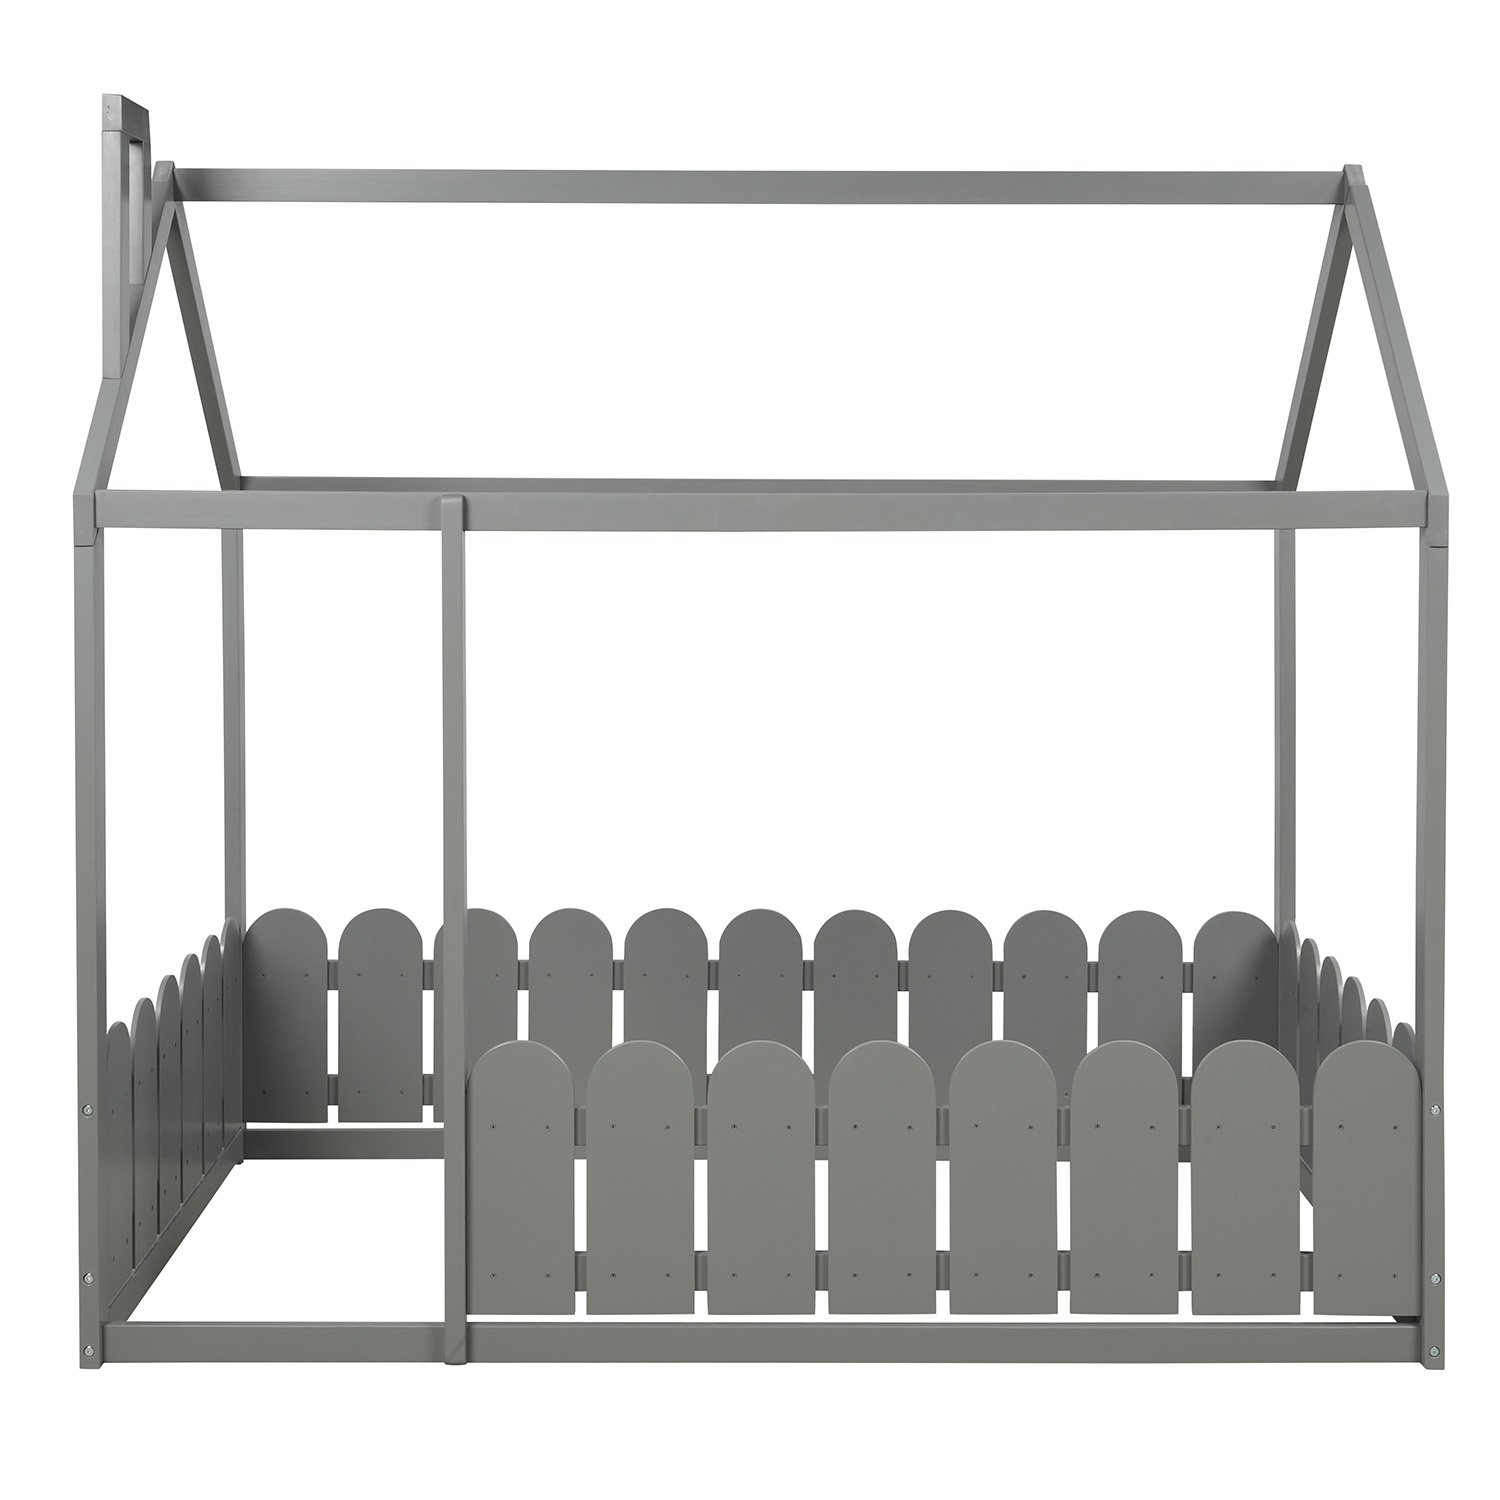 JINS&VICO Twin Size House Bed with Fence, Wood Low Bed Frame with Decorative Roof and Chimney, Playhouse Design Twin Bed for Teens Boys and Girls, Slats are Not Included, Gray - image 4 of 6